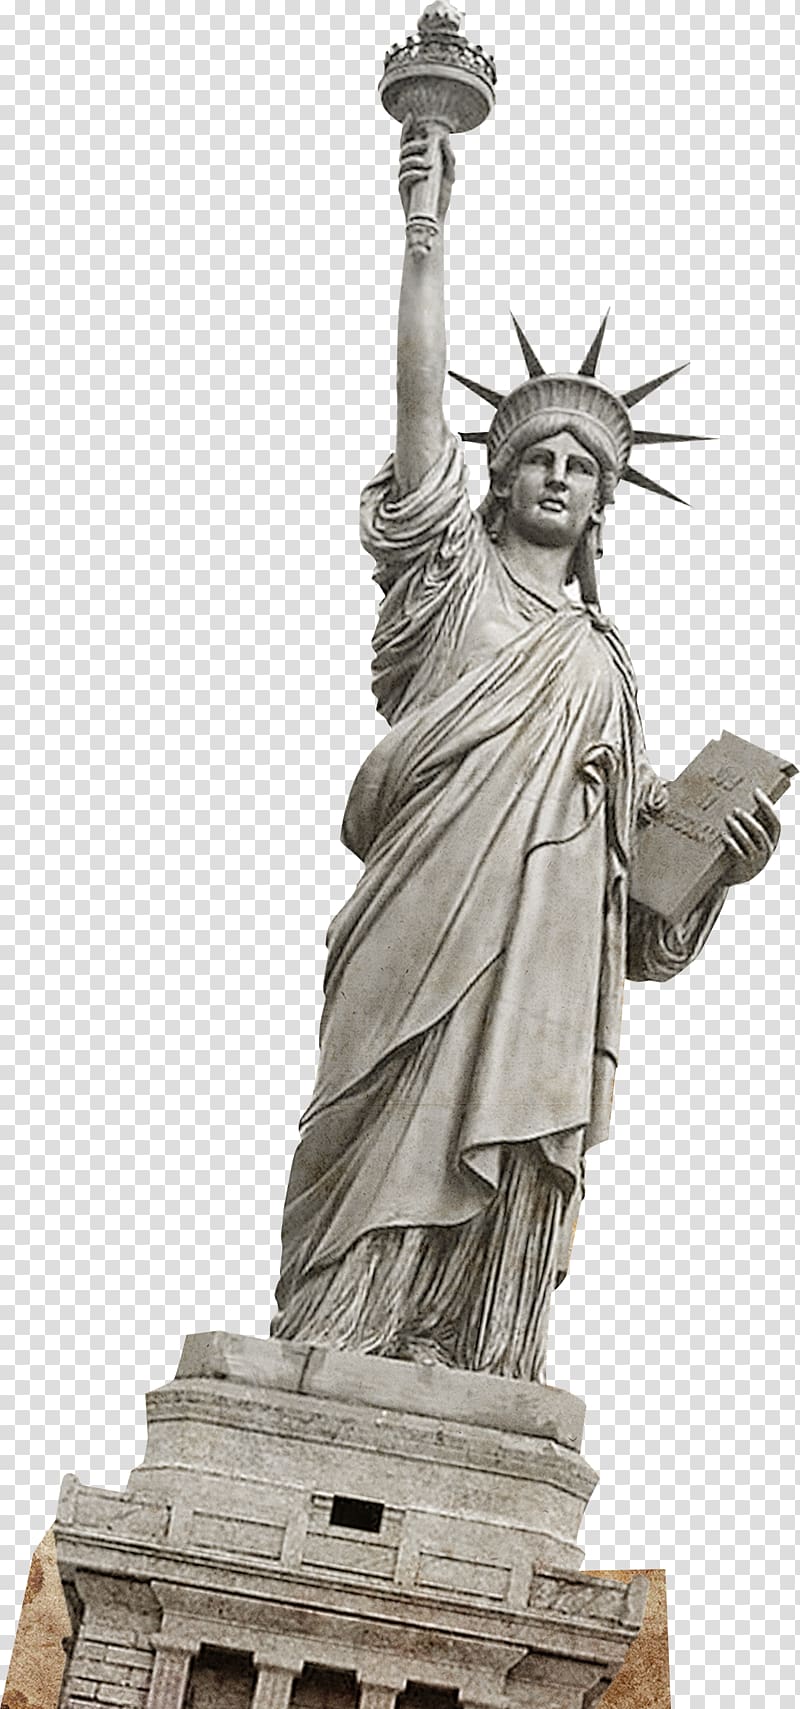 Statue of Liberty One World Trade Center Landmark, Statue of Liberty transparent background PNG clipart